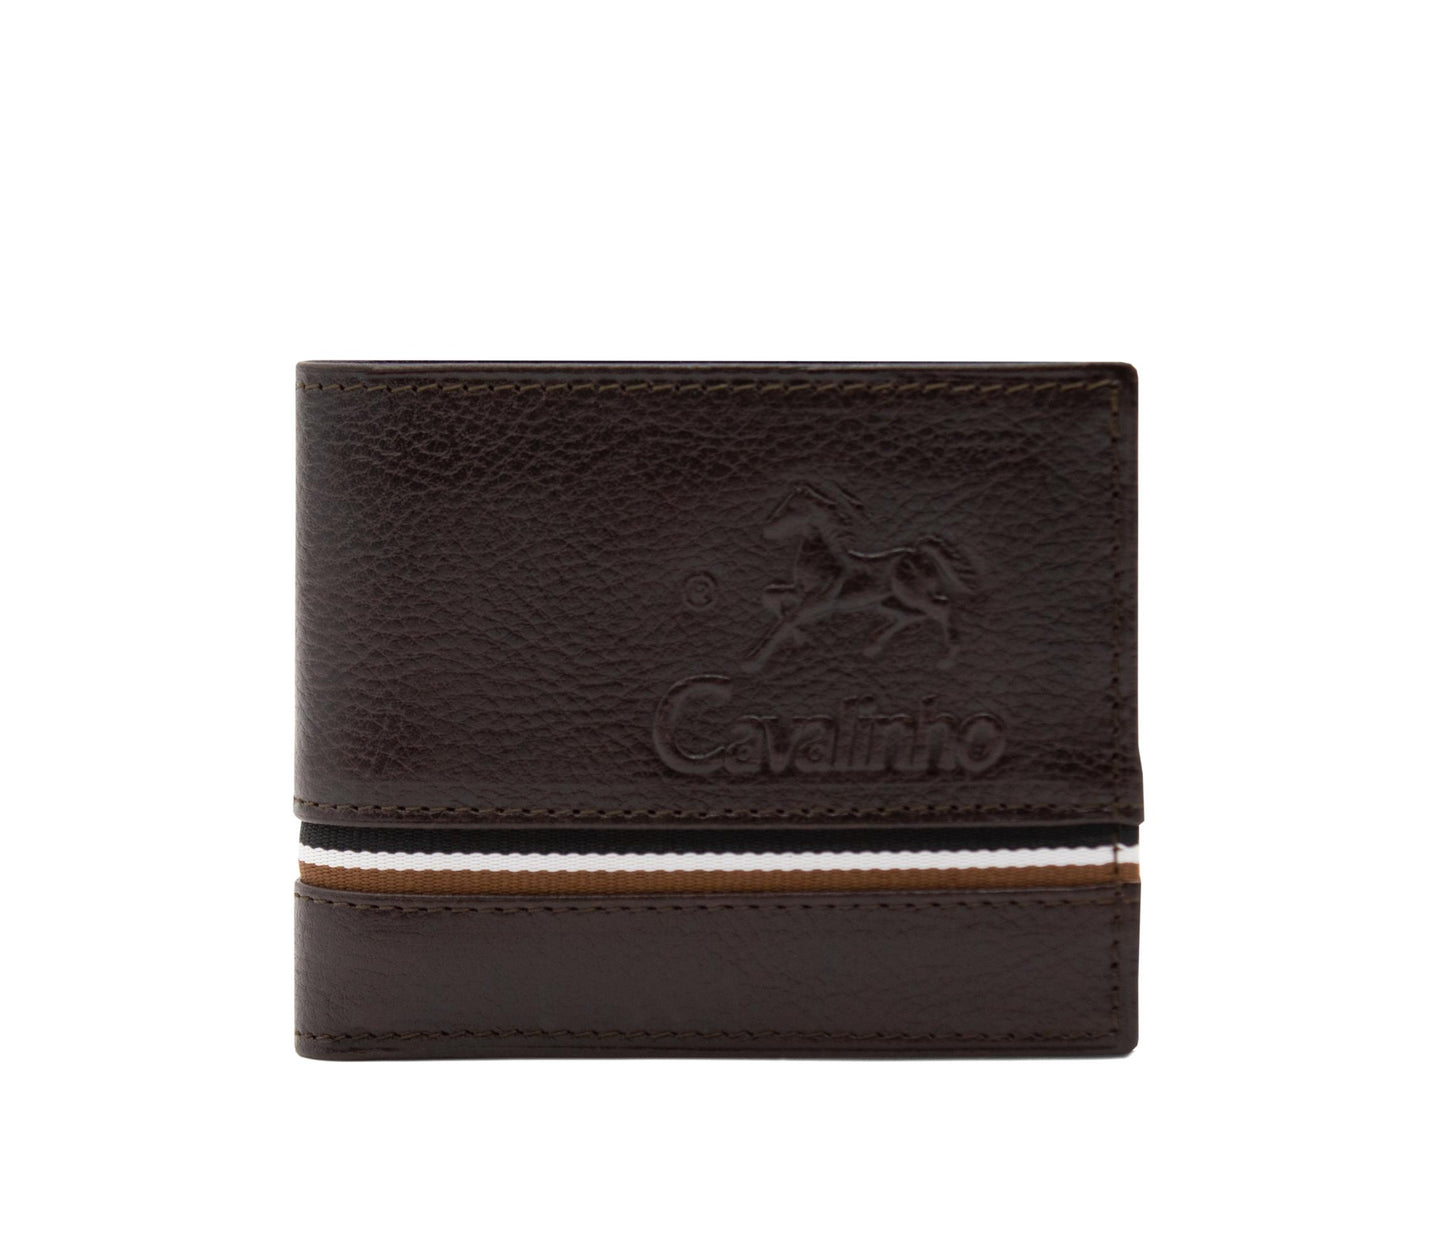 #color_ Brown | Cavalinho The Sailor 2 in 1 Bifold Leather Wallet - Brown - 28150528.02_1